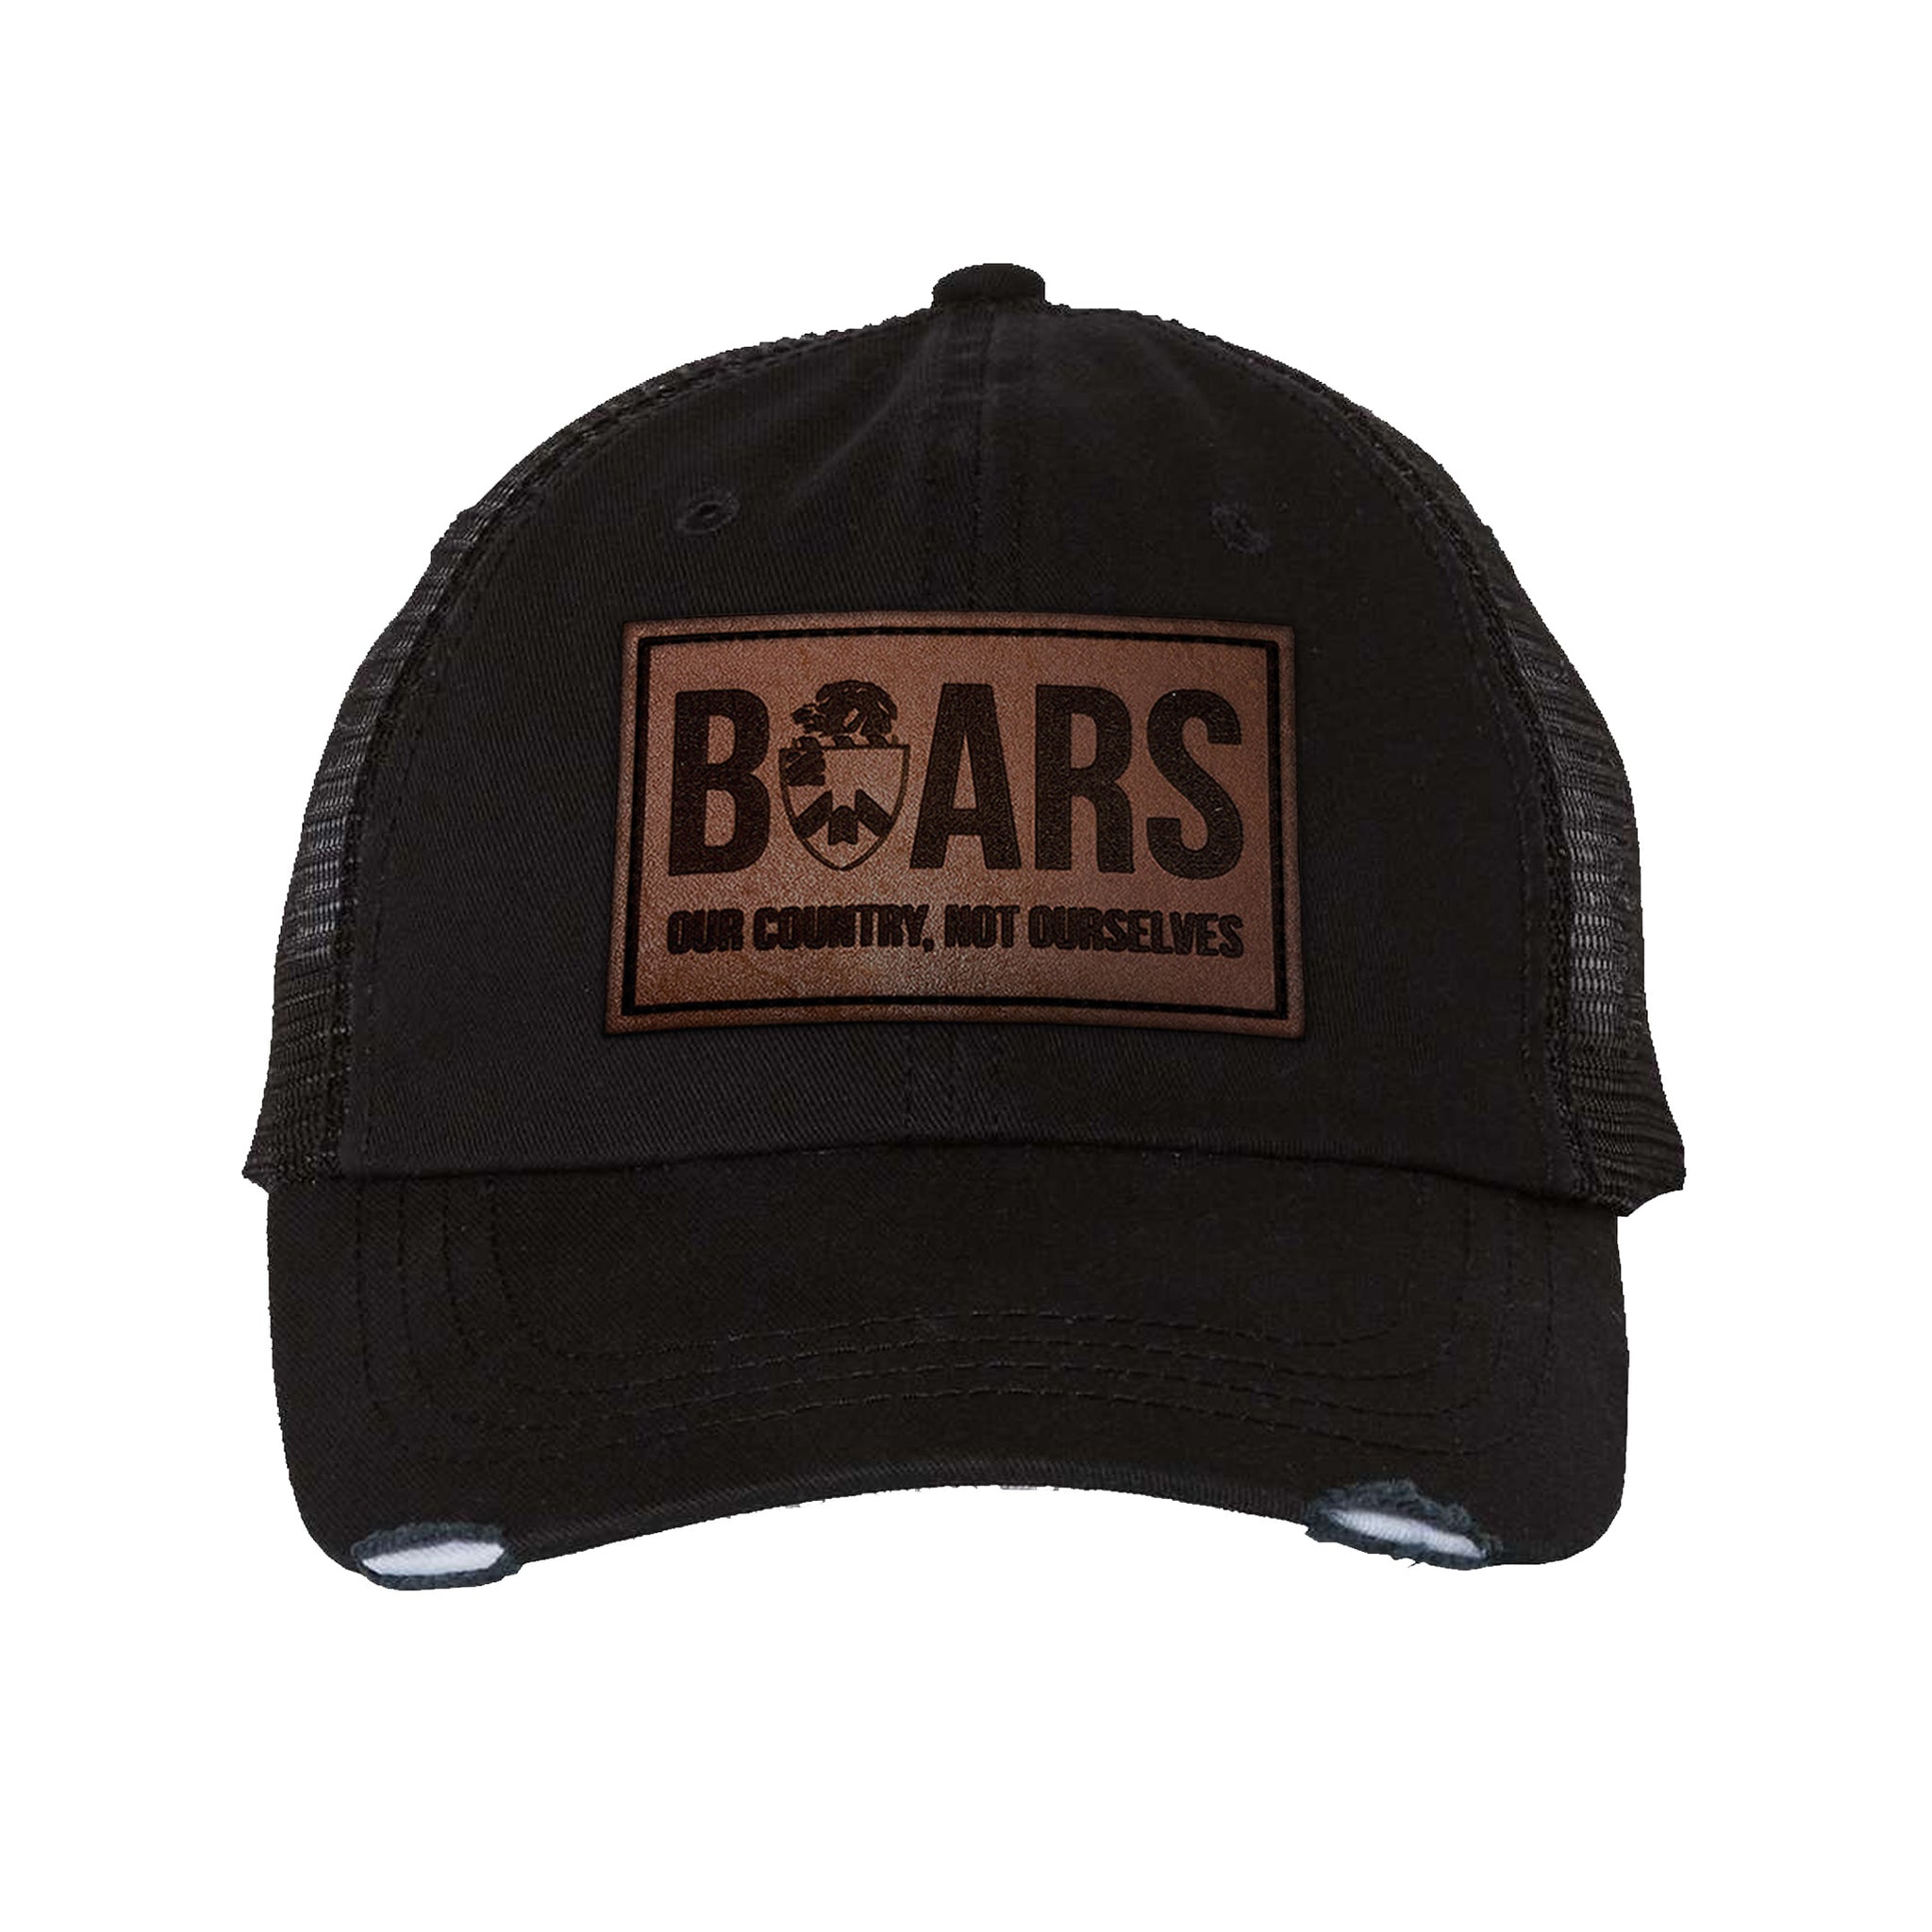 Wild Boars Leather Dad Cap